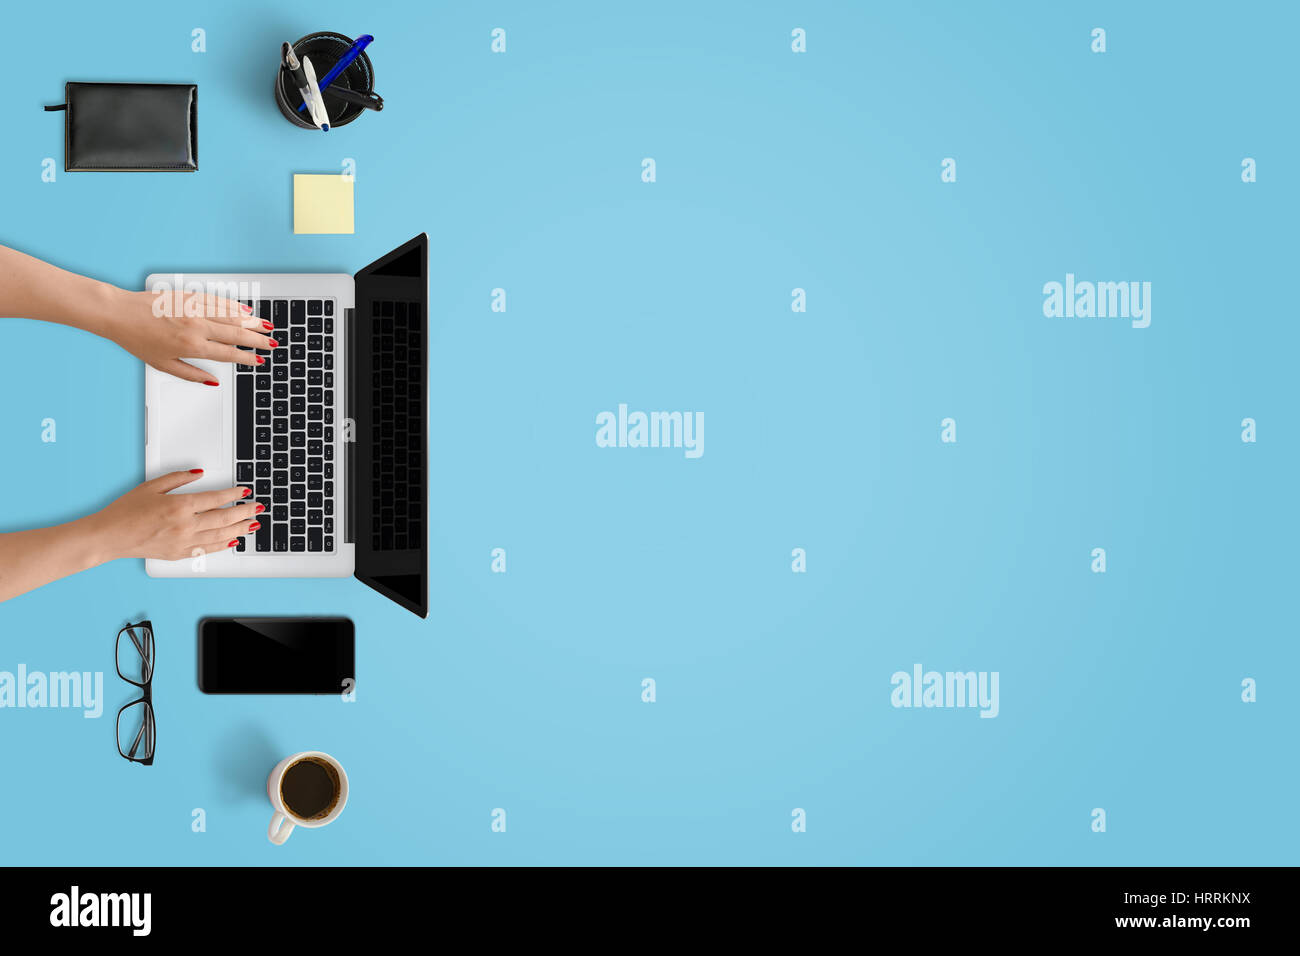 Laptop, smart phone and office supplies with free space for text. Top view of modern blue desk. Stock Photo